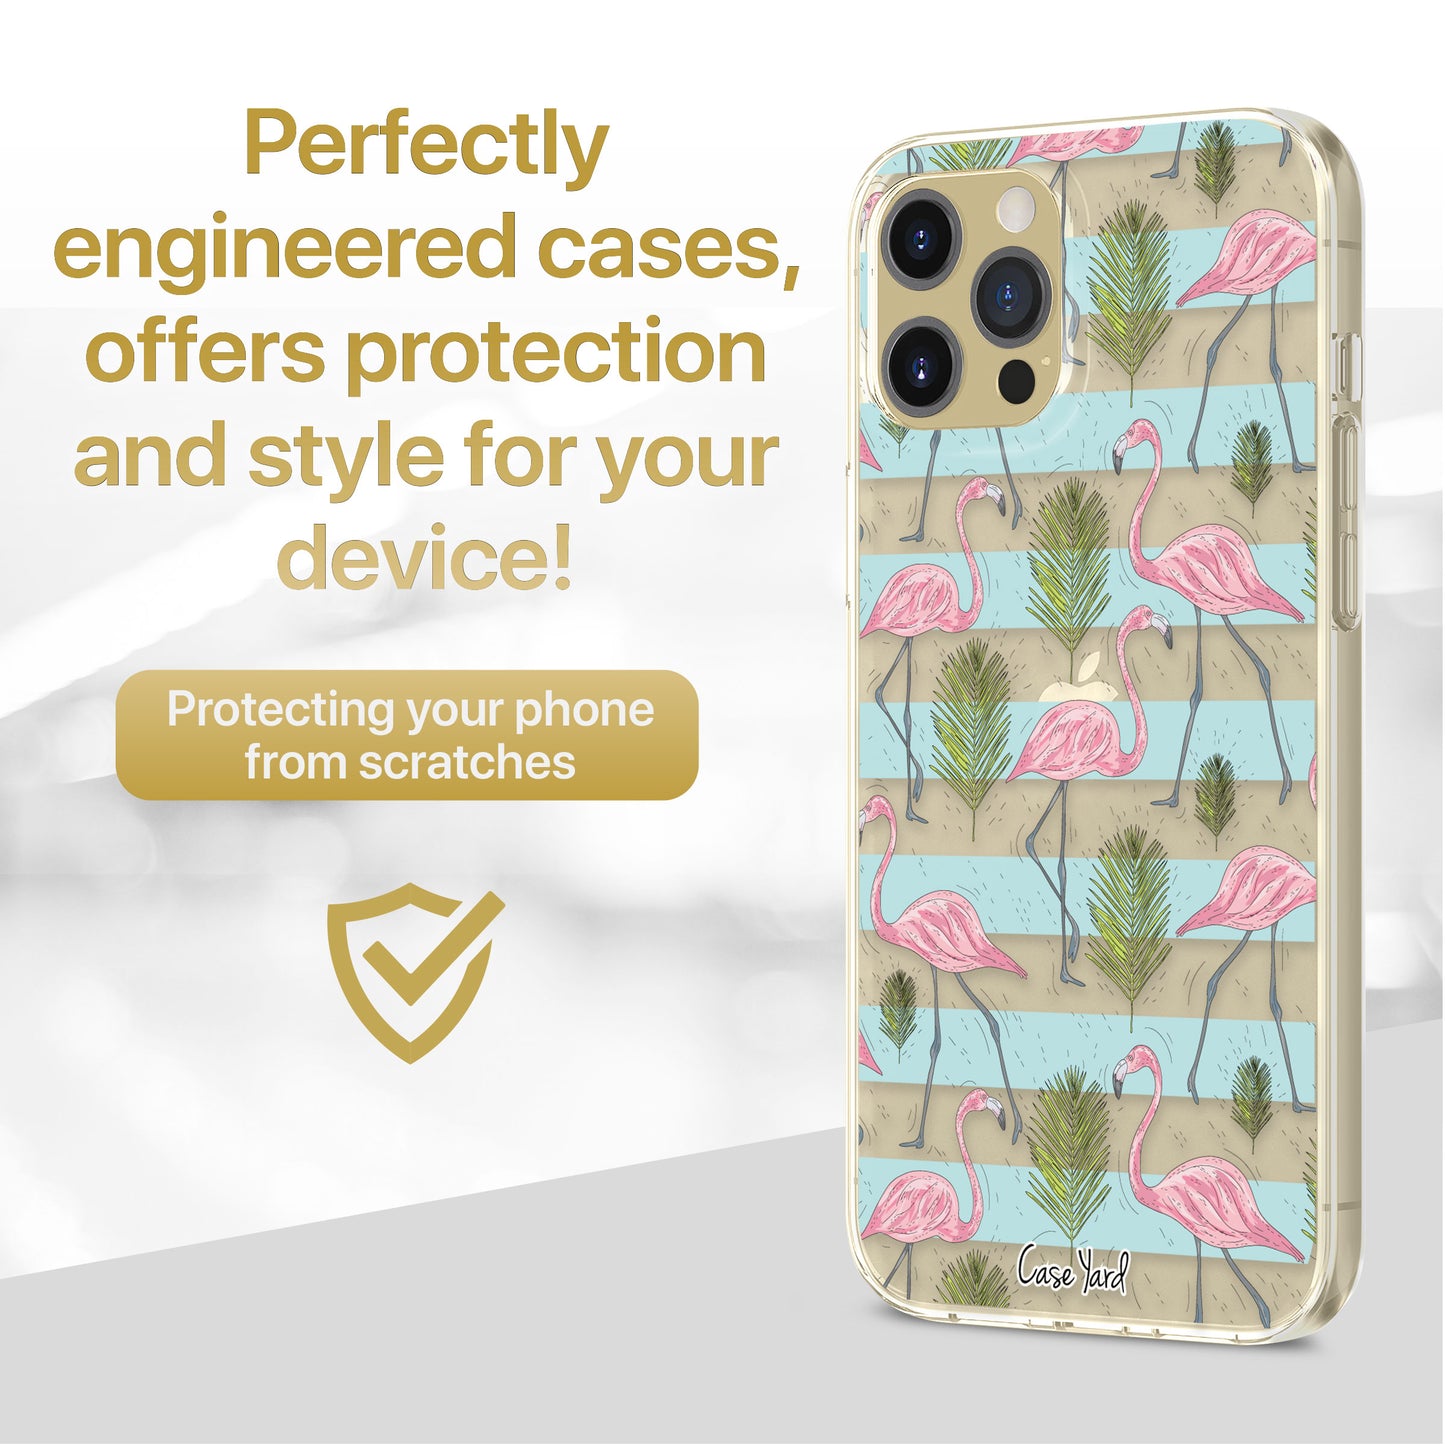 TPU Clear case with (Flamingo Stripes) Design for iPhone & Samsung Phones